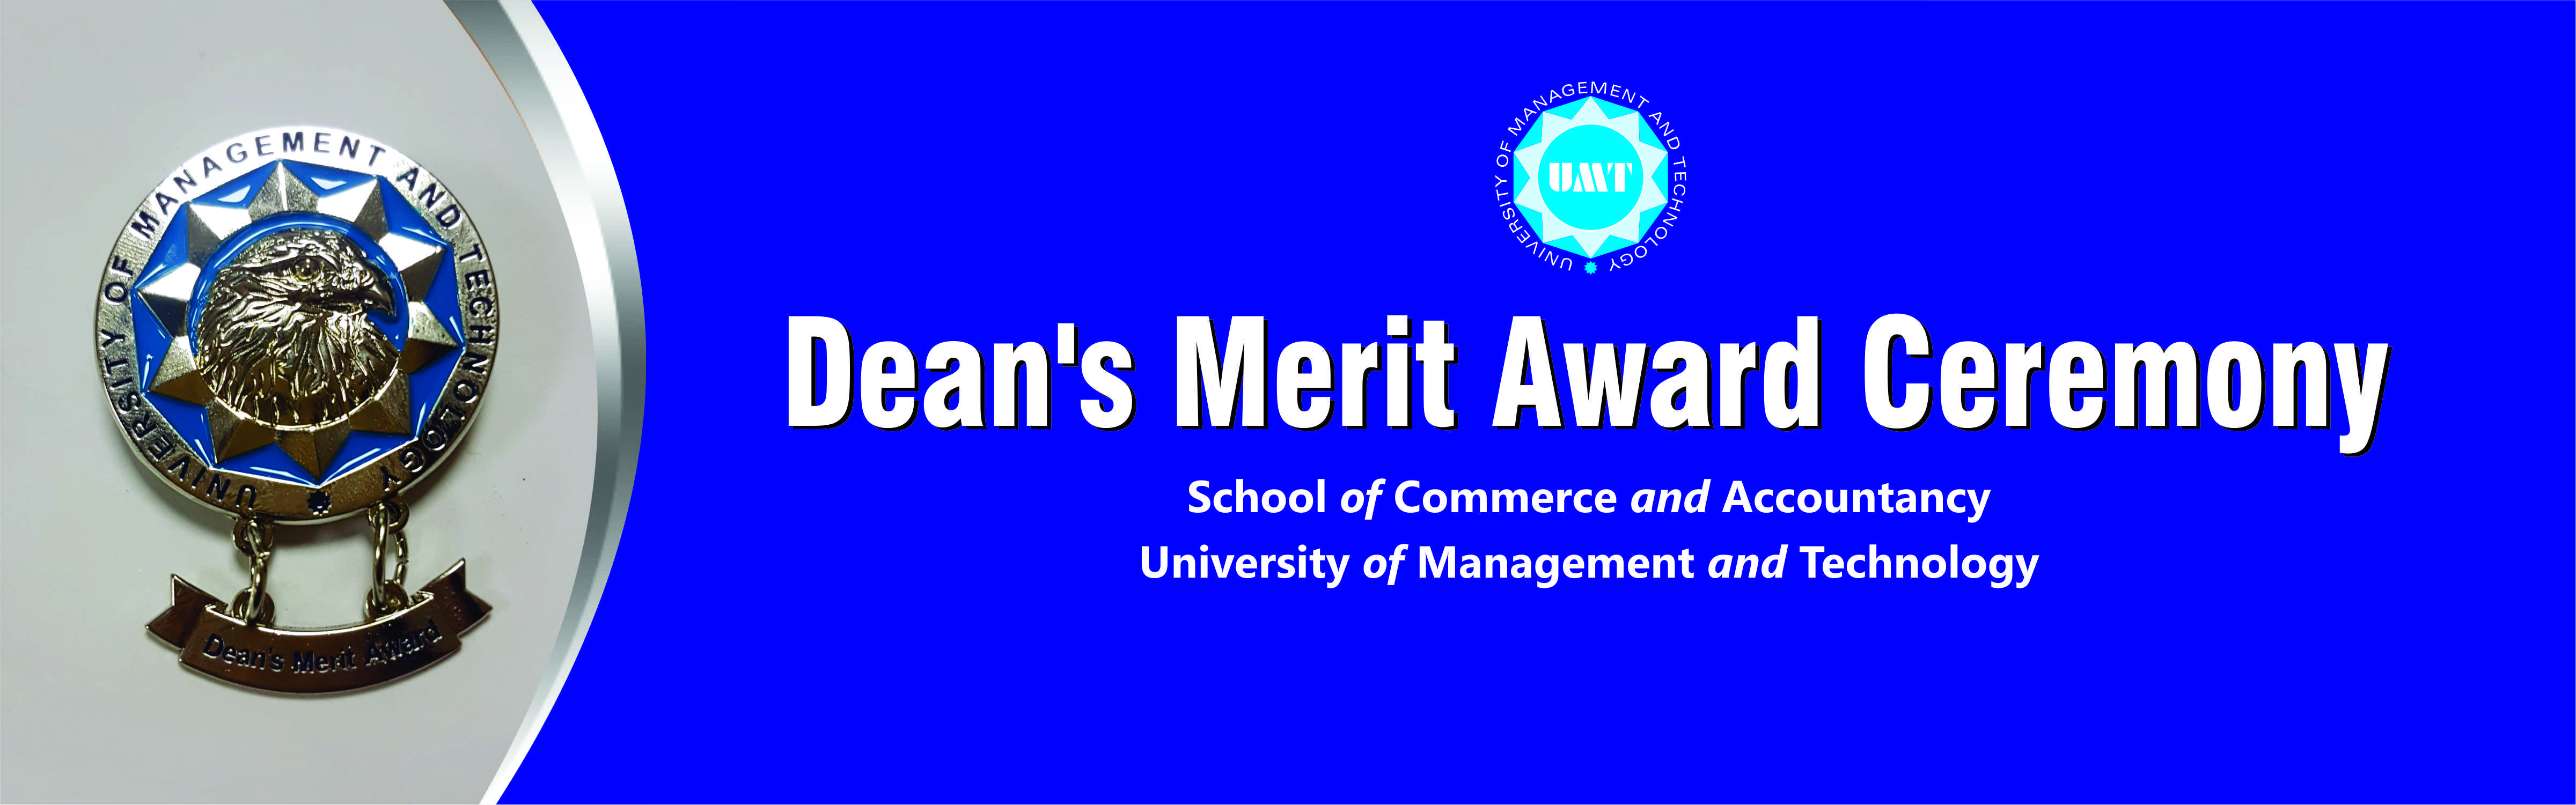 Dean's Merit Award Ceremony (Fall 20 and Spring 21)